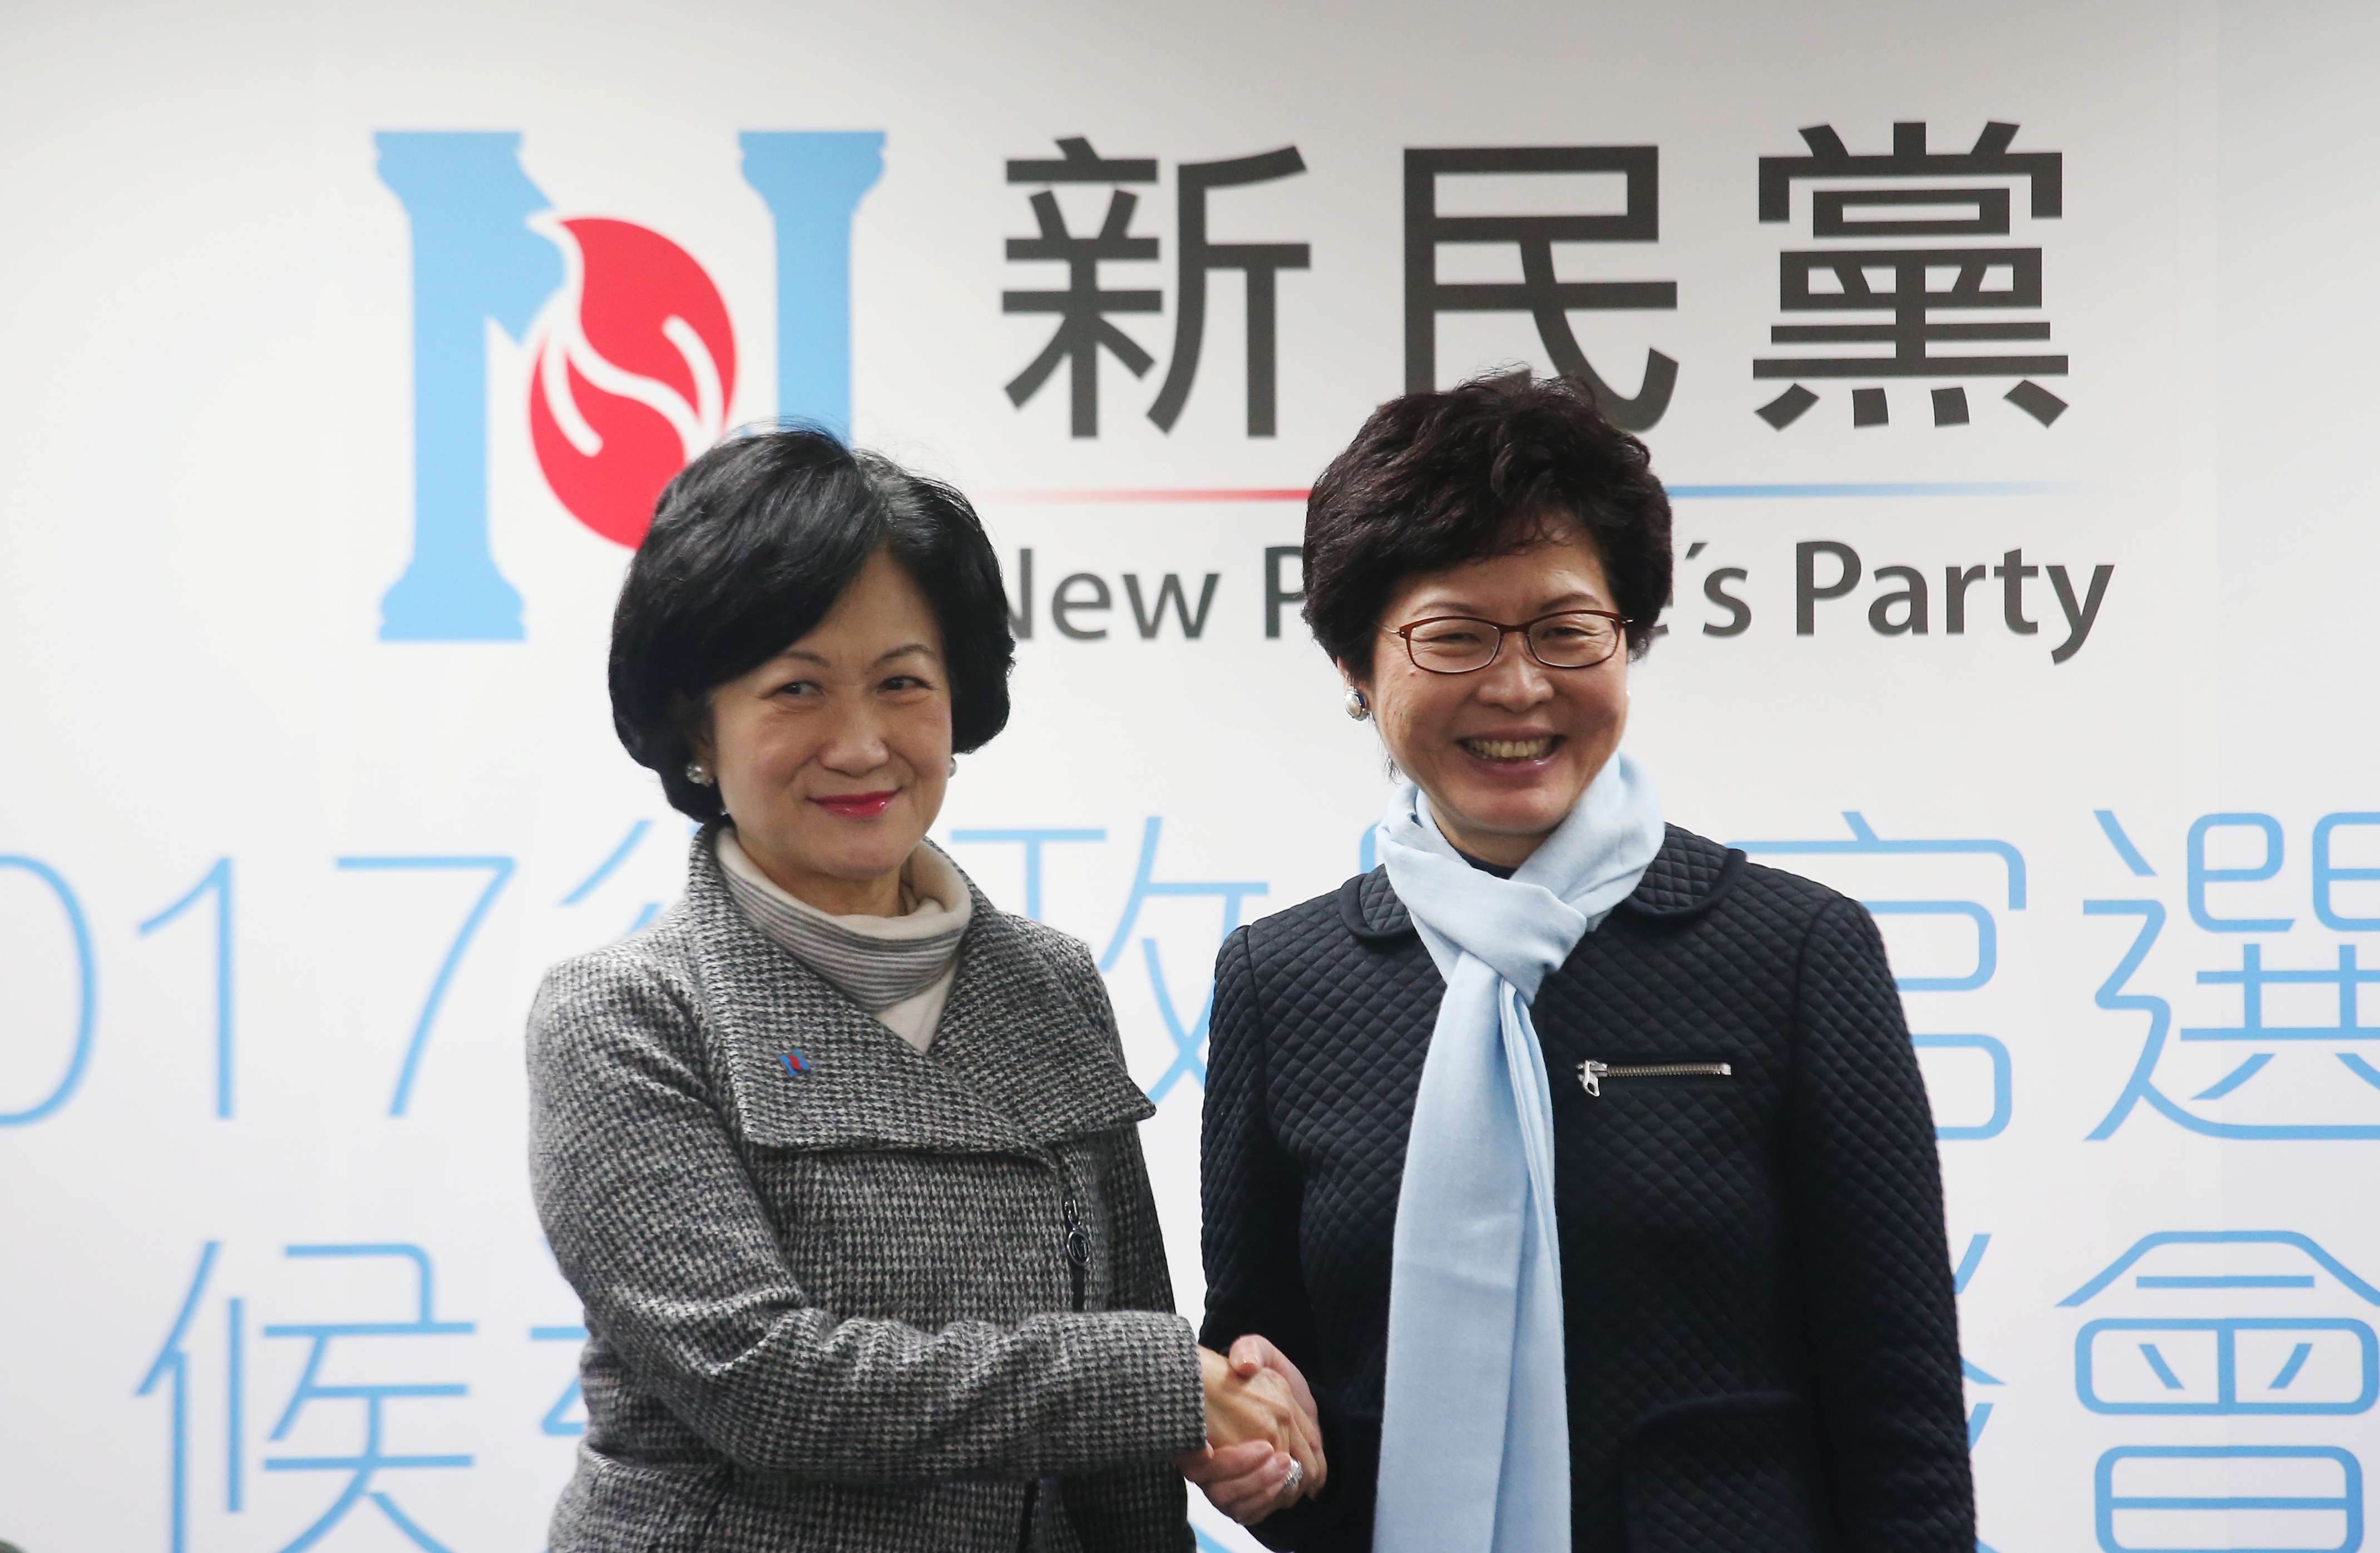 New People's Party chairwoman Regina Ip Lau Suk-yee (left) with chief executive-elect Carrie Lam Cheng Yuet-ngor. Photo: David Wong